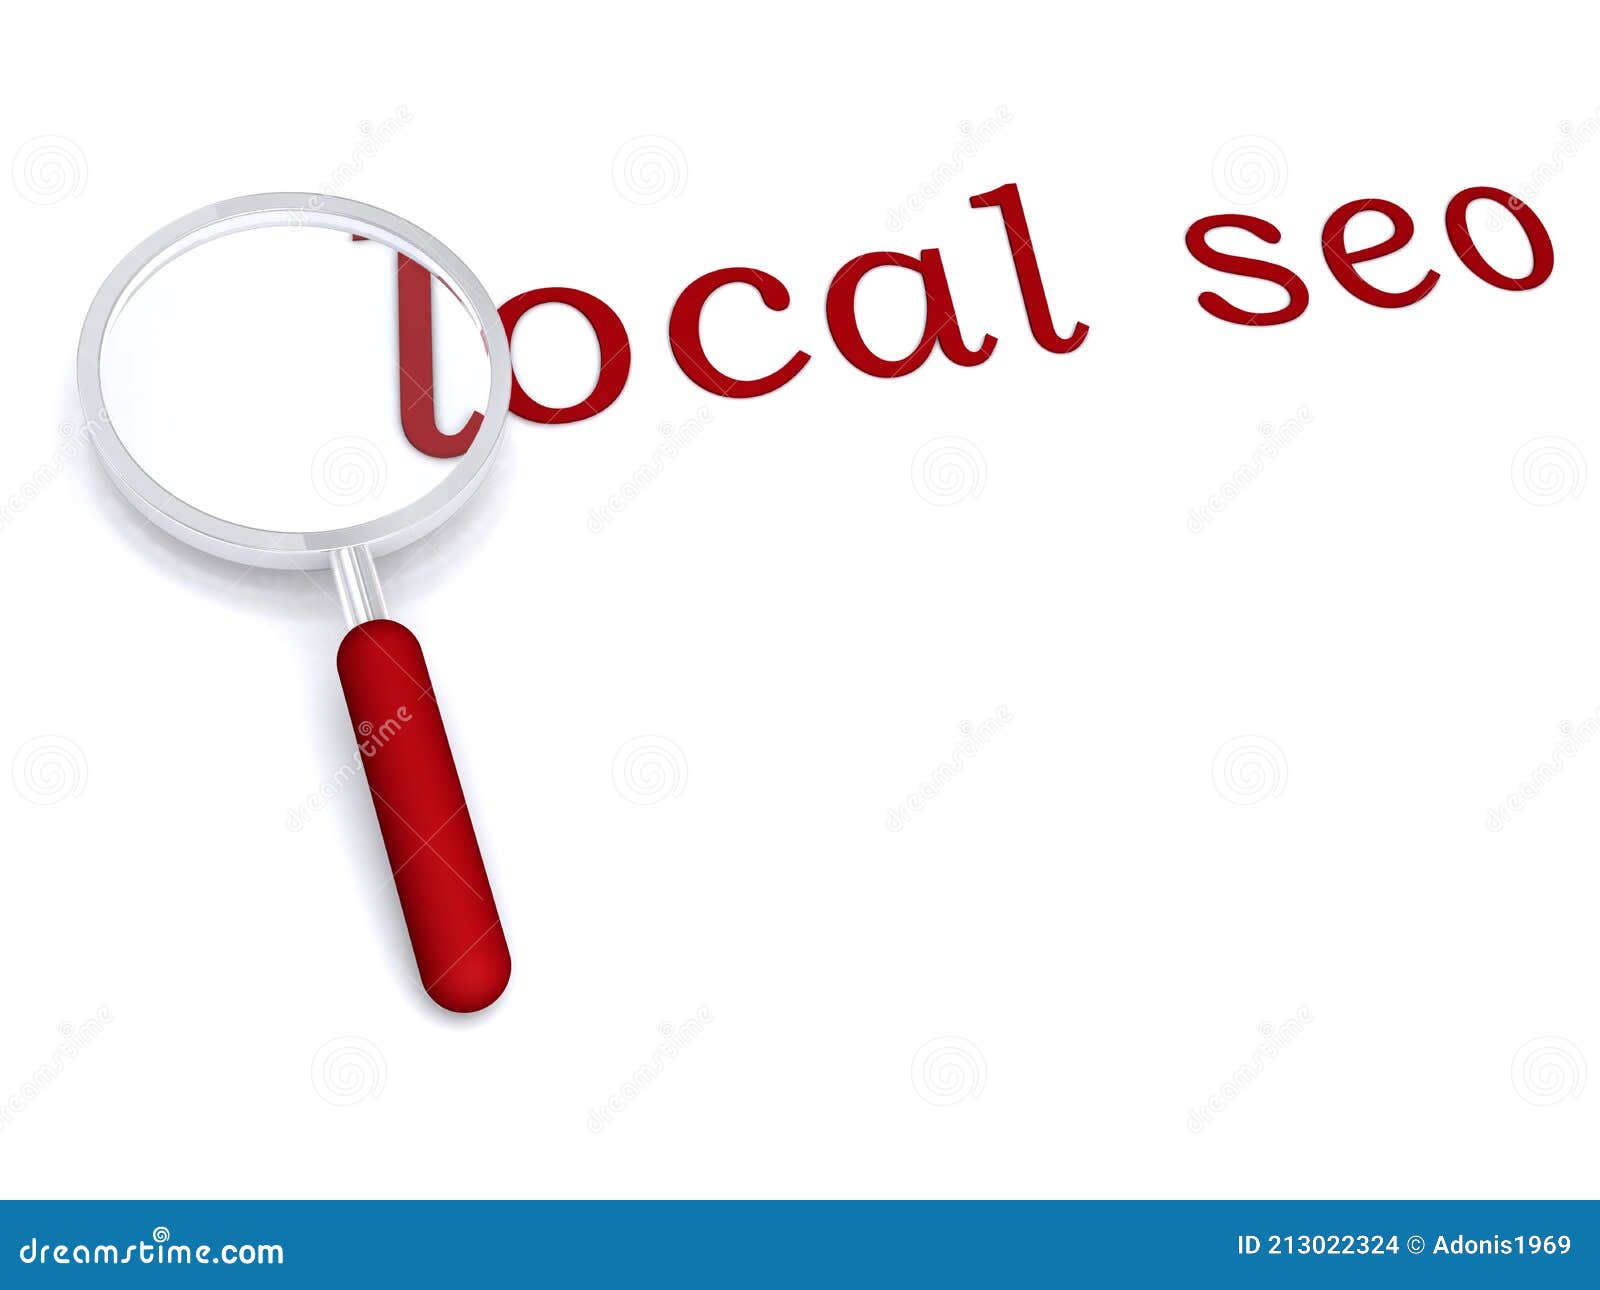 local seo with magnifying glass